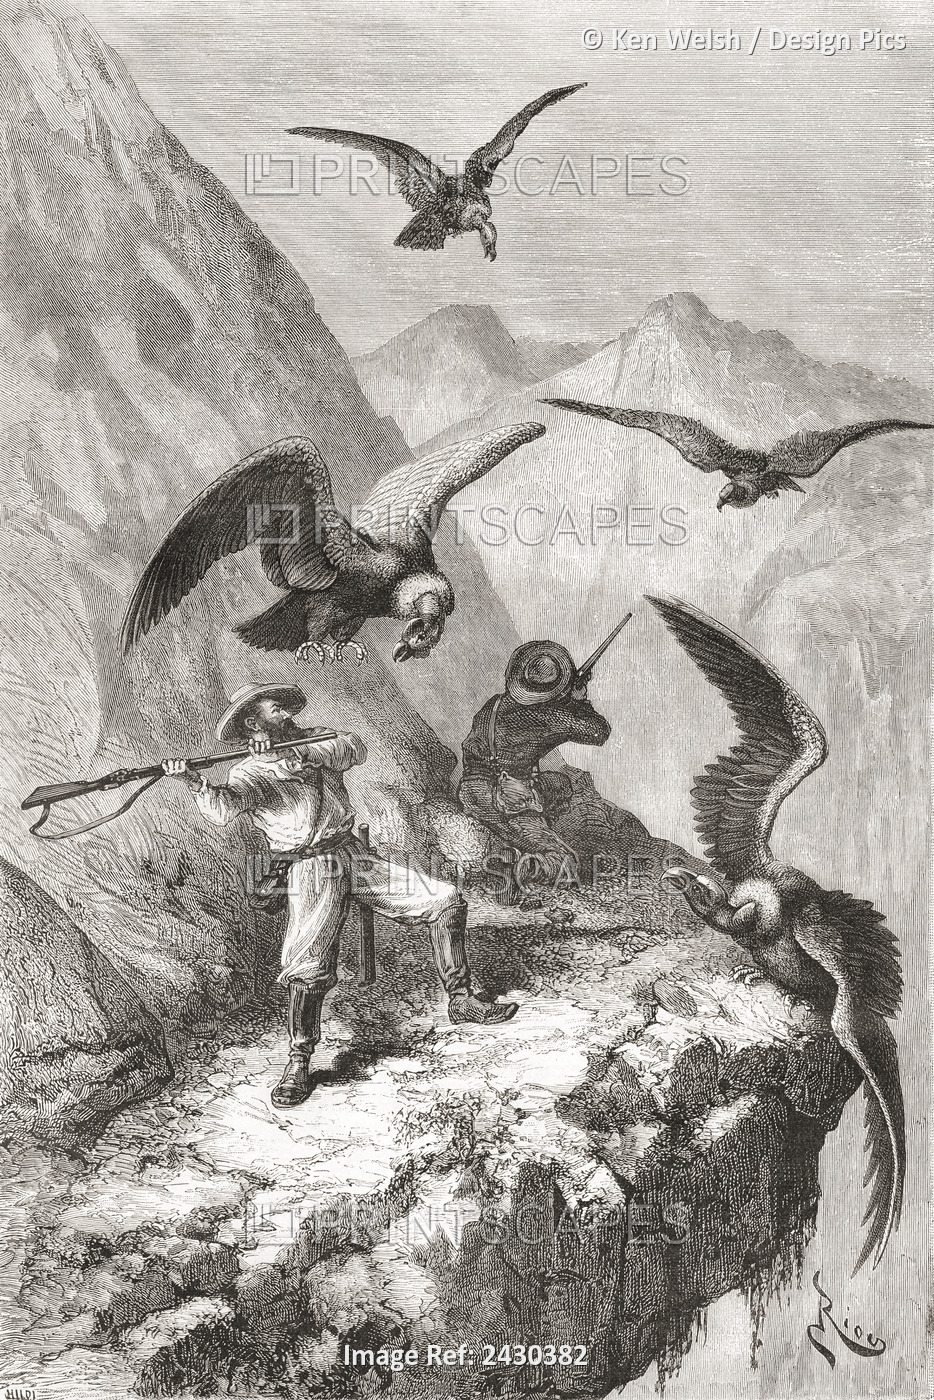 Édouard François André and his companion being attacked by condors near ...